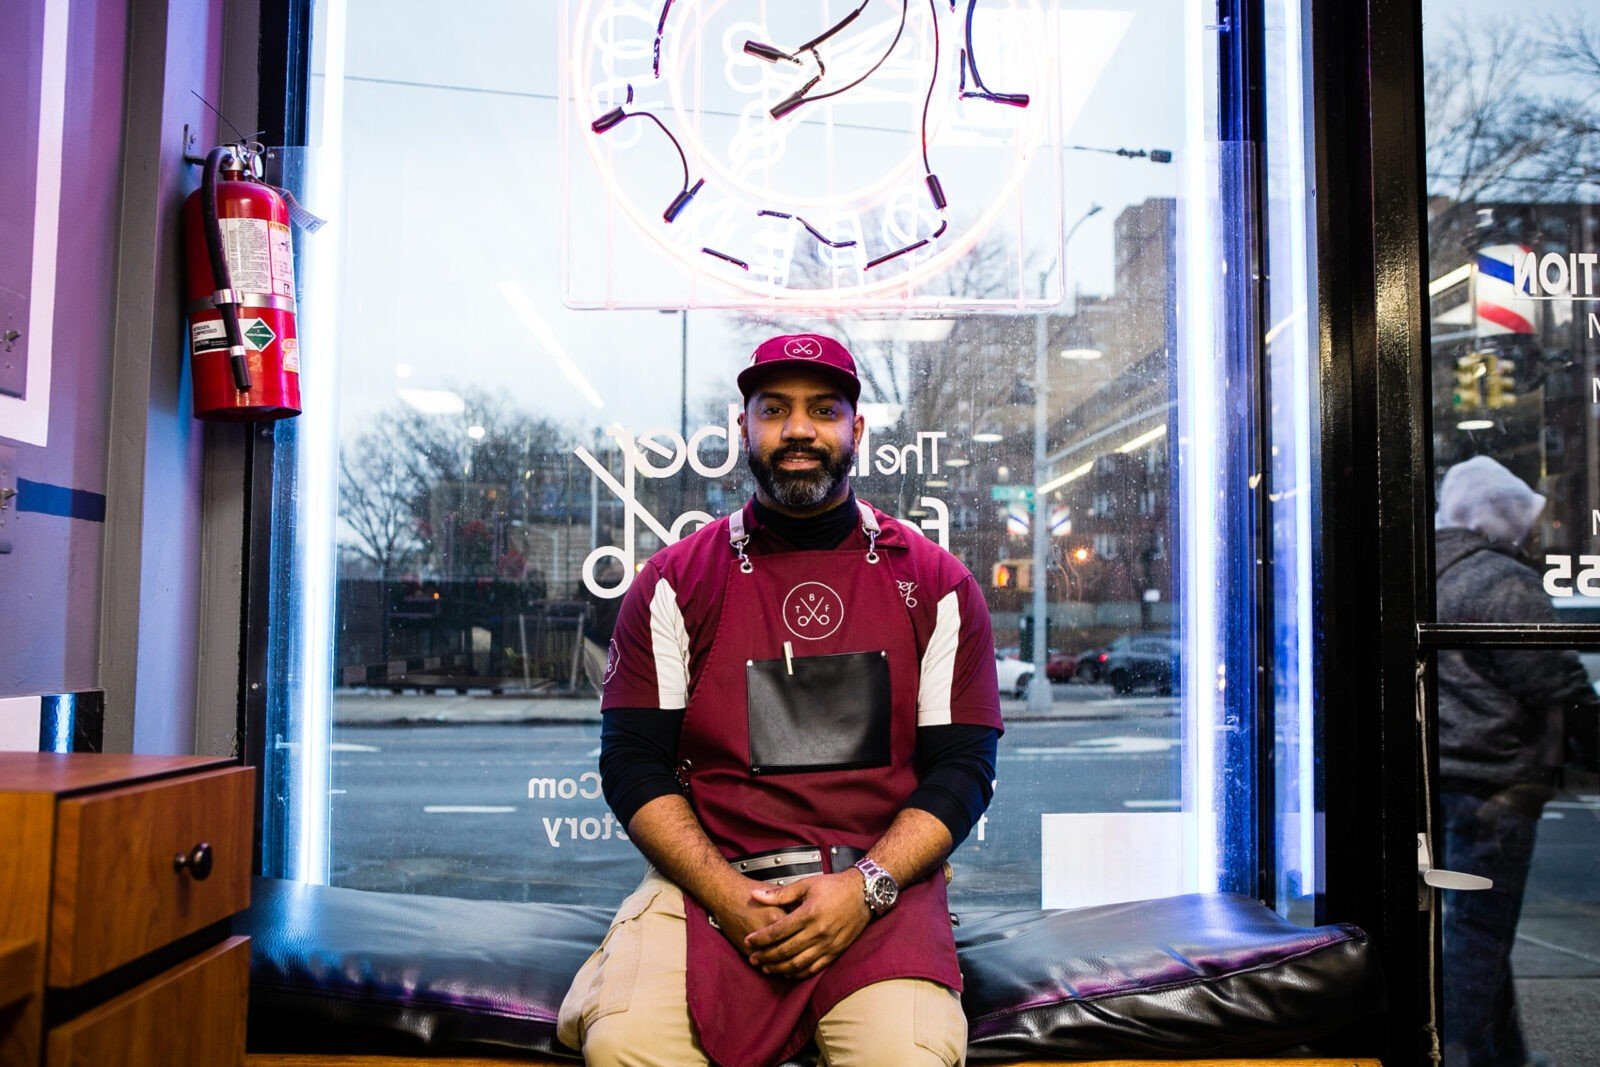 Nestor seated at the front window of his shop wearing a maroon hat and apron with his logo, open scissors and with the letters “T,” “B,” and “F”. 